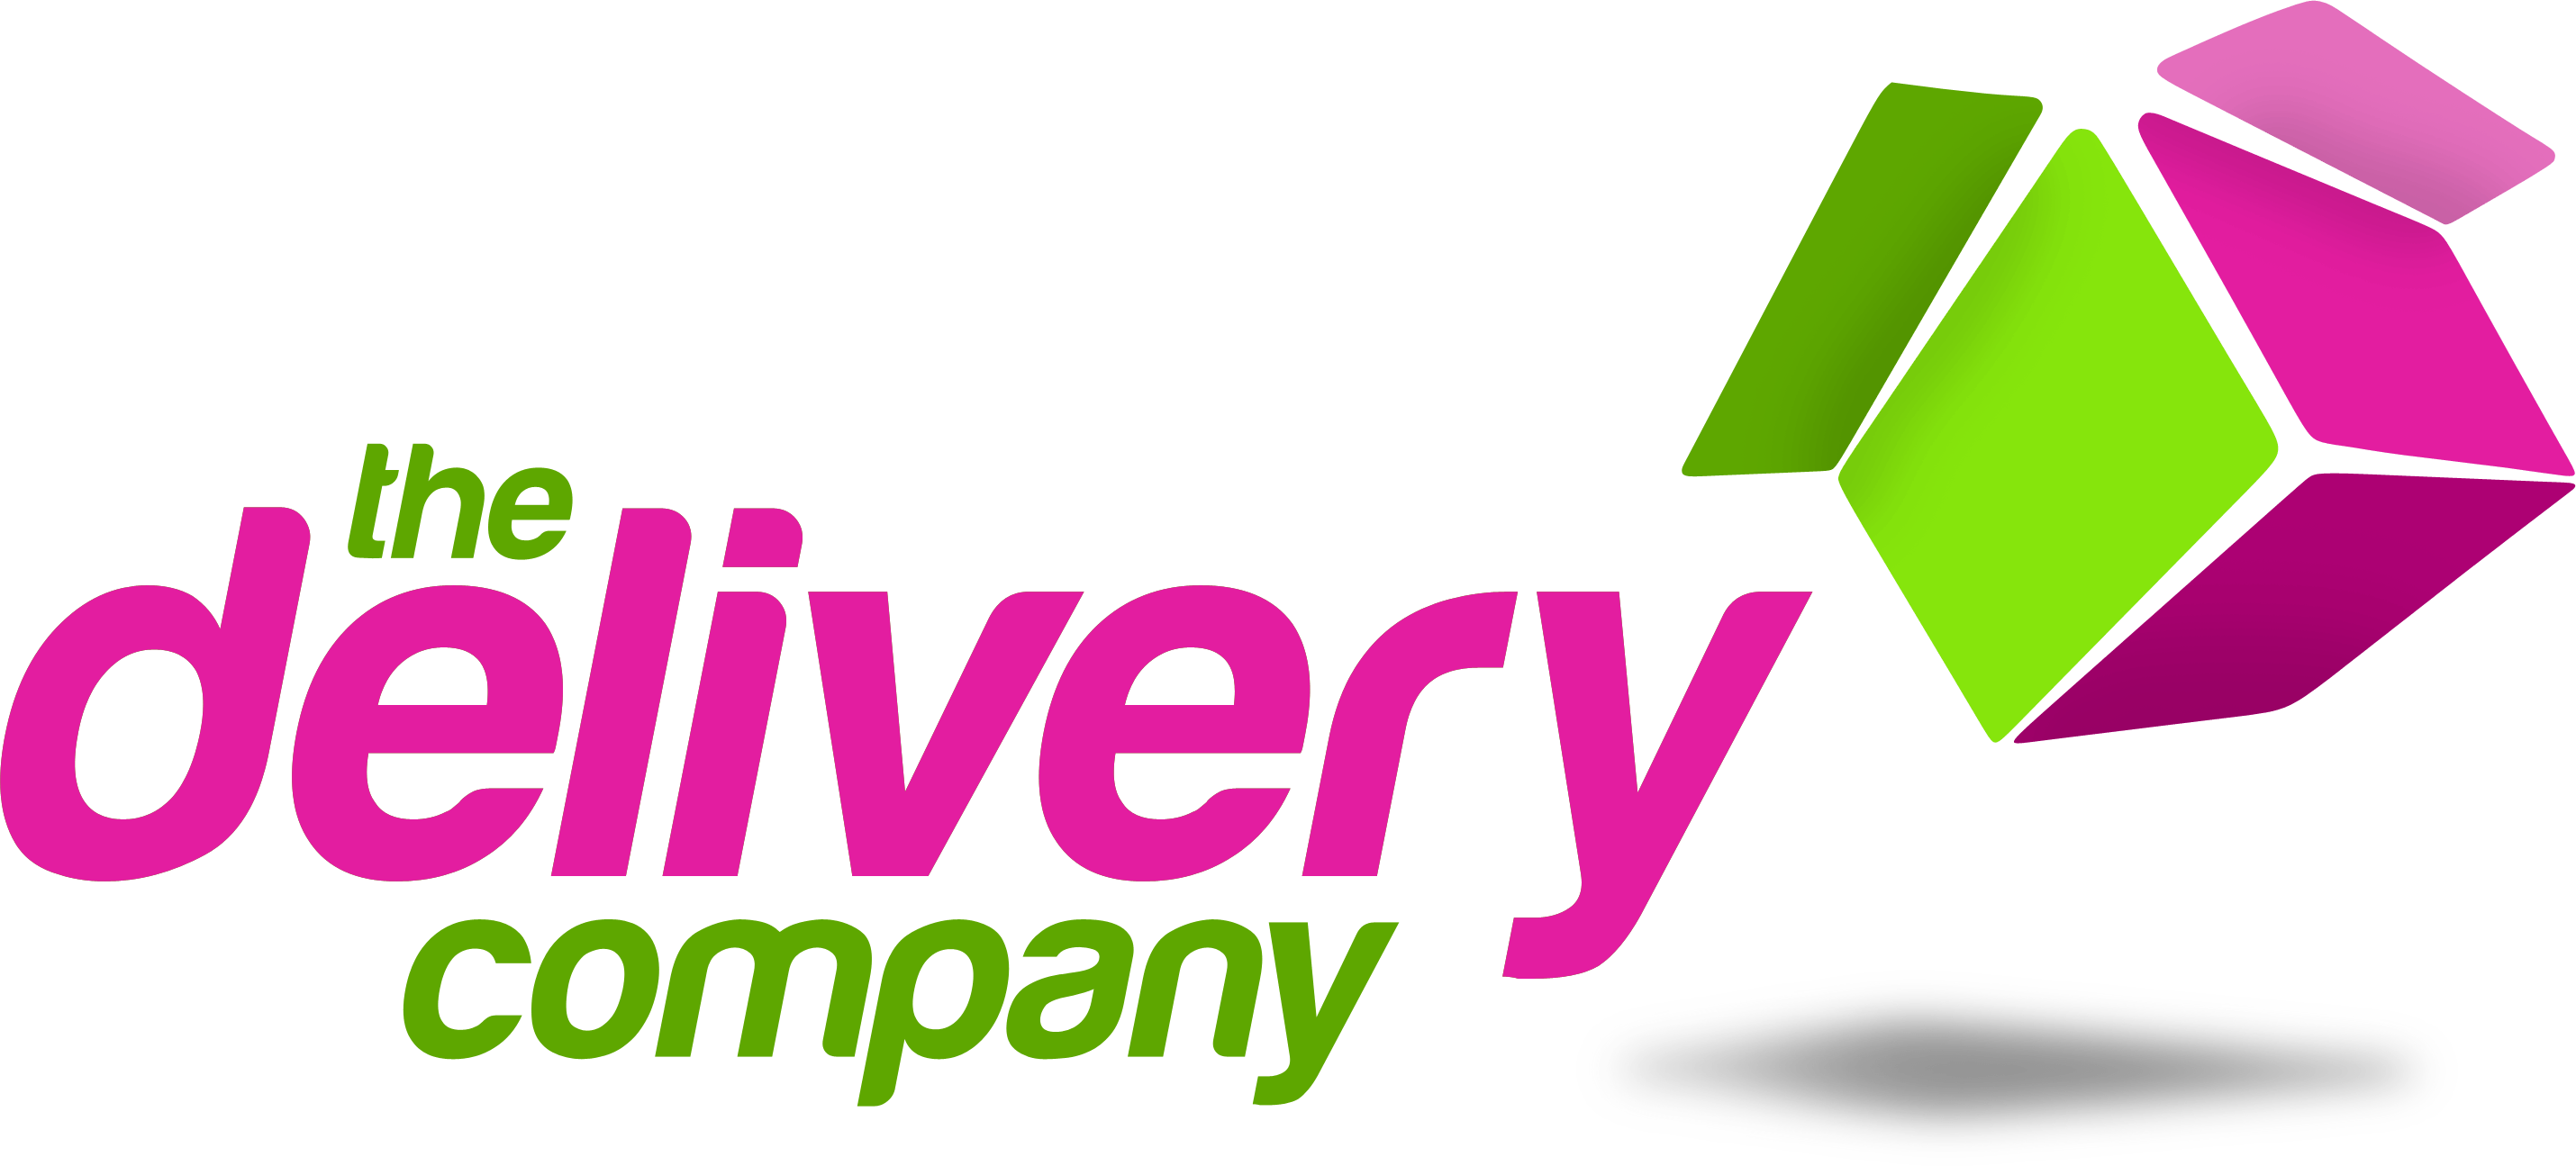 Delivery Company Logo - New London Van Sharing Company Now Offers Shared Delivery Service To